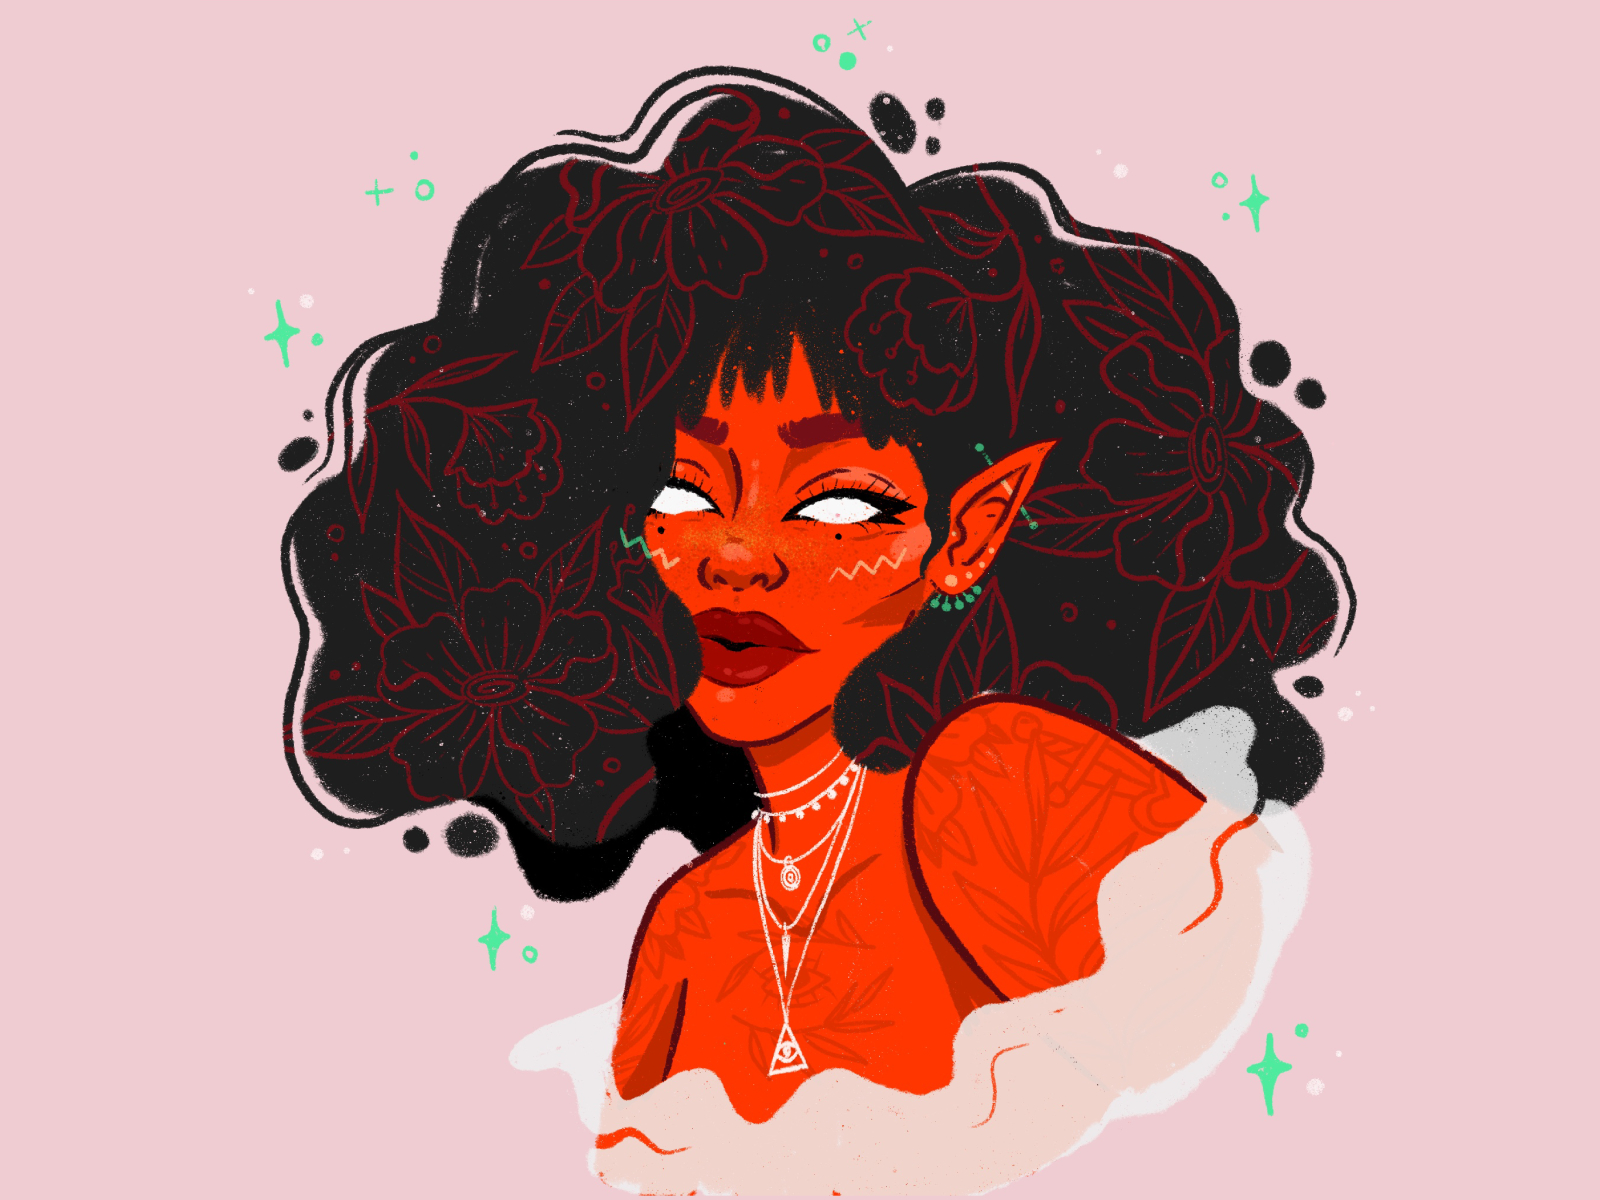 Classic Demon by Olivia Lane on Dribbble